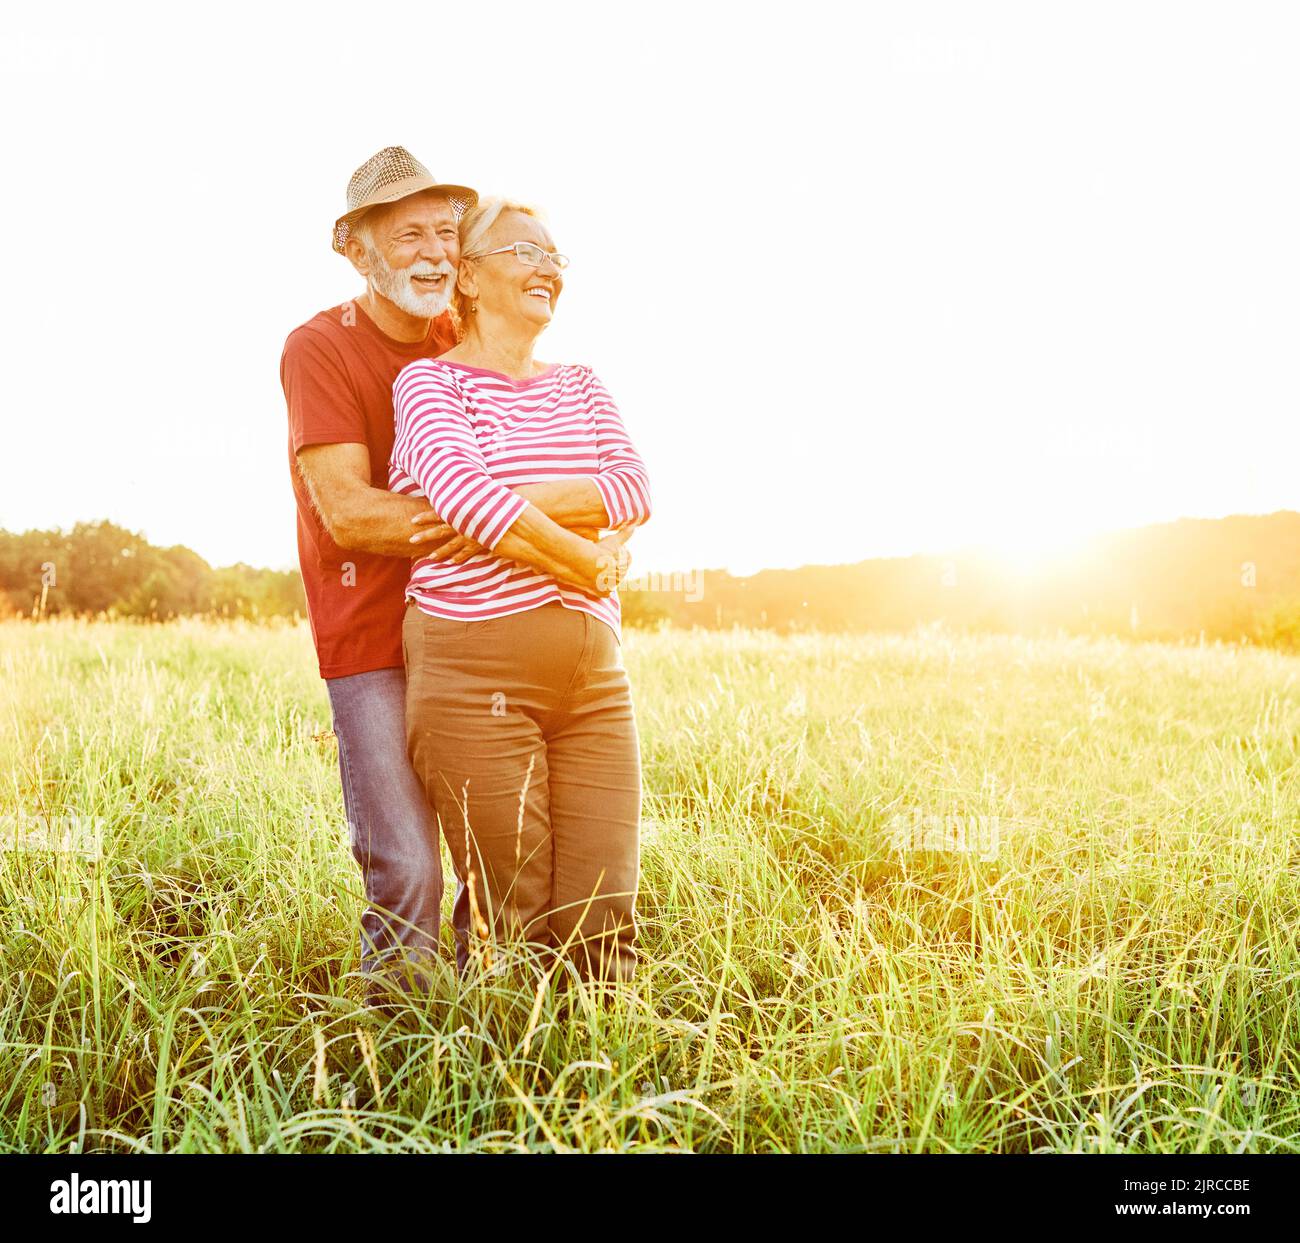 woman man outdoor senior couple happy lifestyle retirement together smiling love old nature mature elderly vitality active Stock Photo